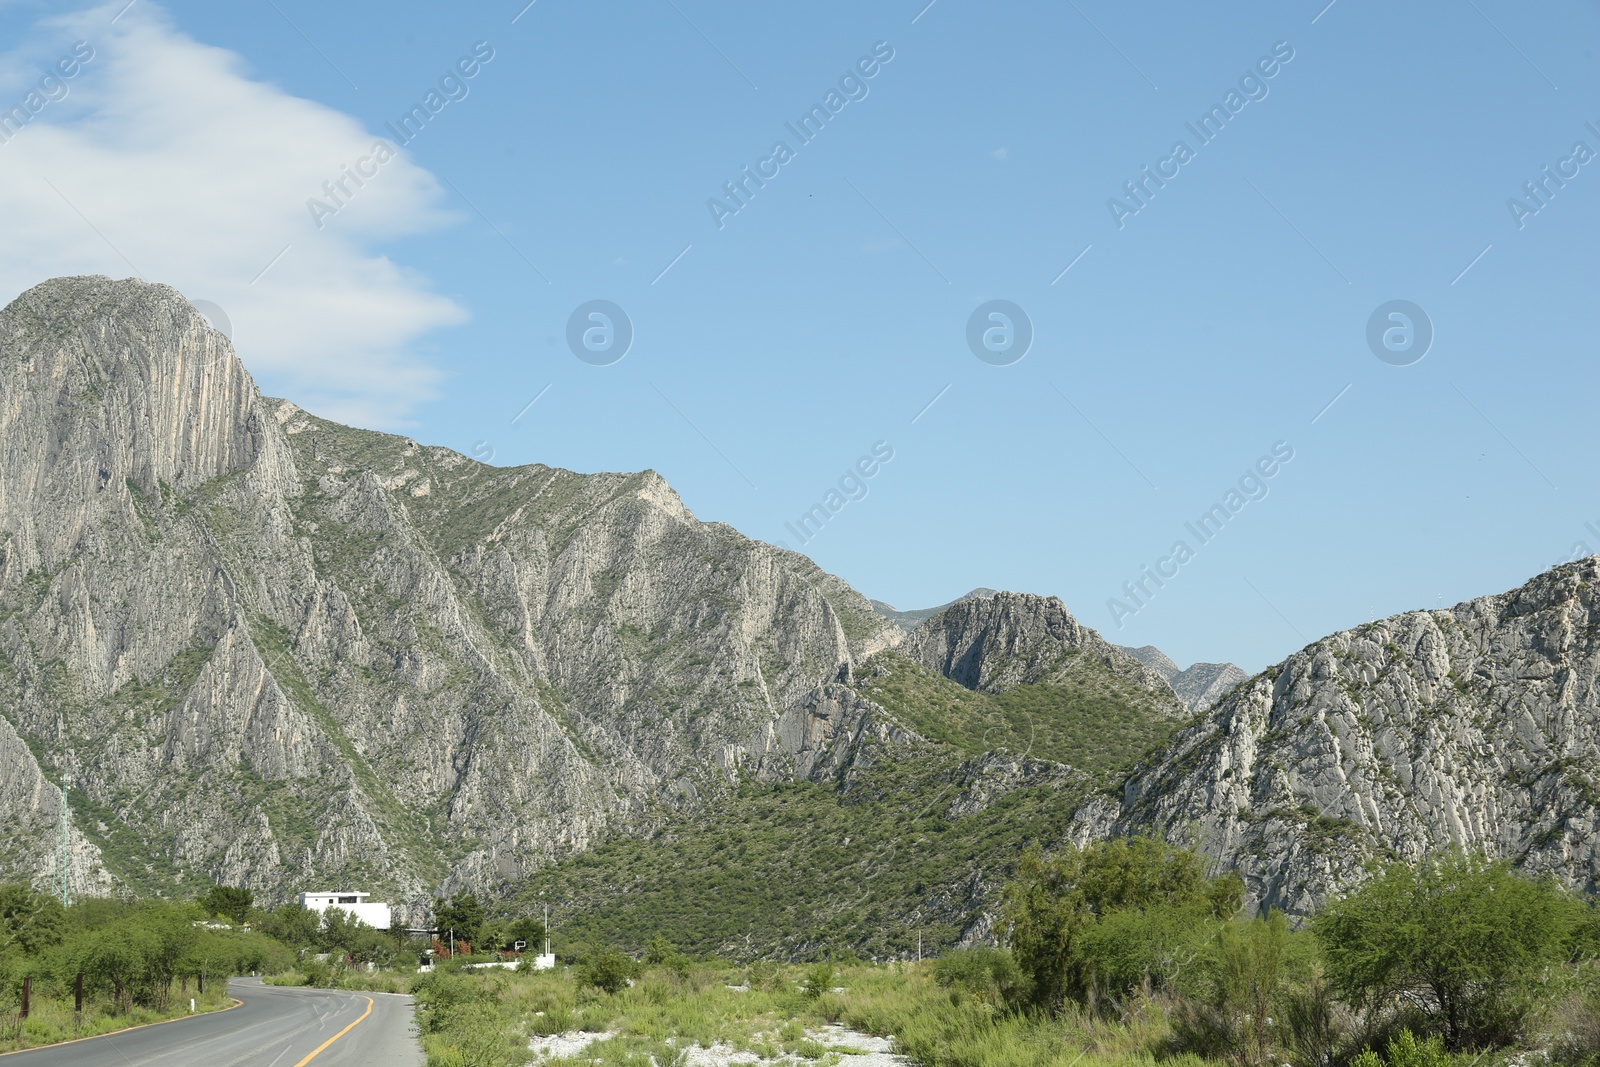 Photo of Picturesque landscape with high mountains under blue sky outdoors